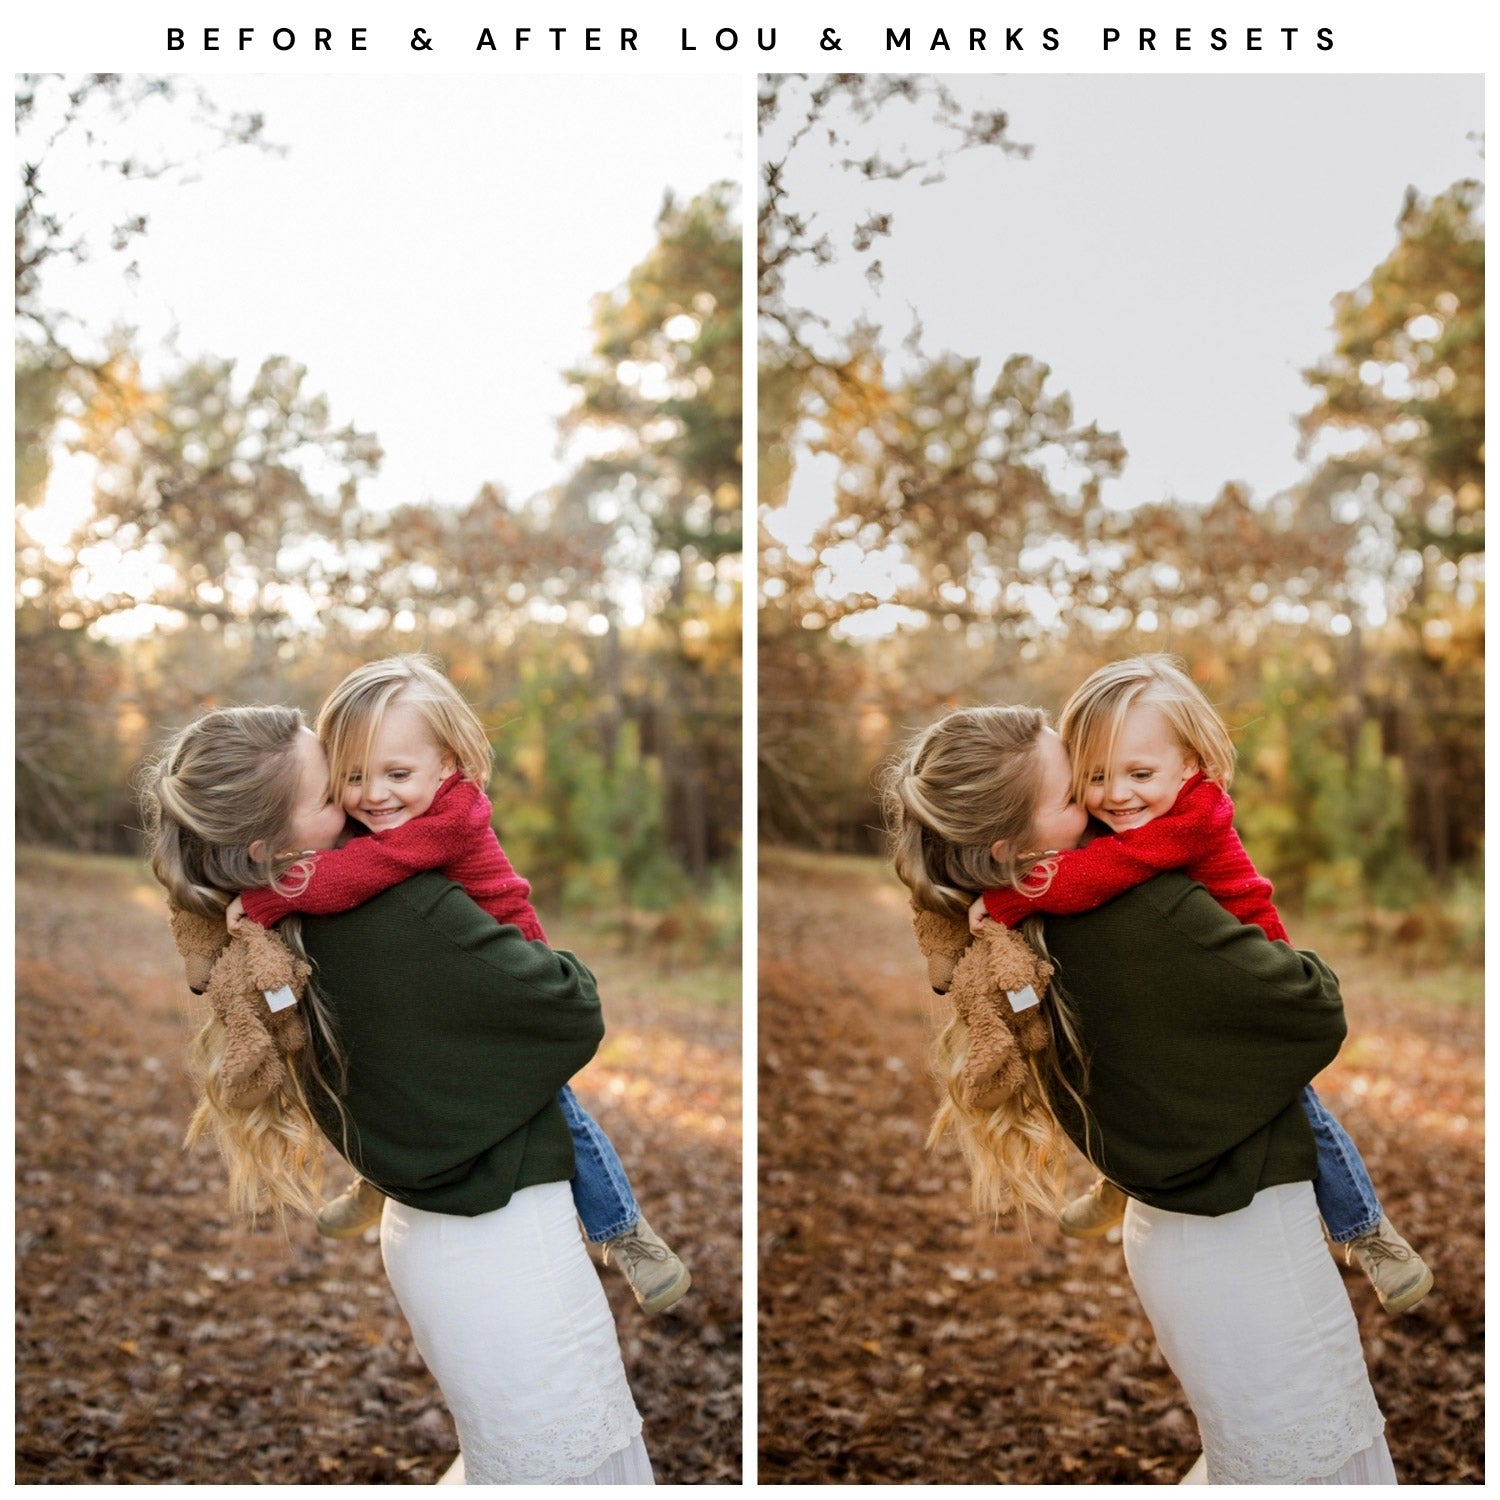 Lou And Marks Presets Moody Lightroom Presets Bundle The Best Moody Presets Family